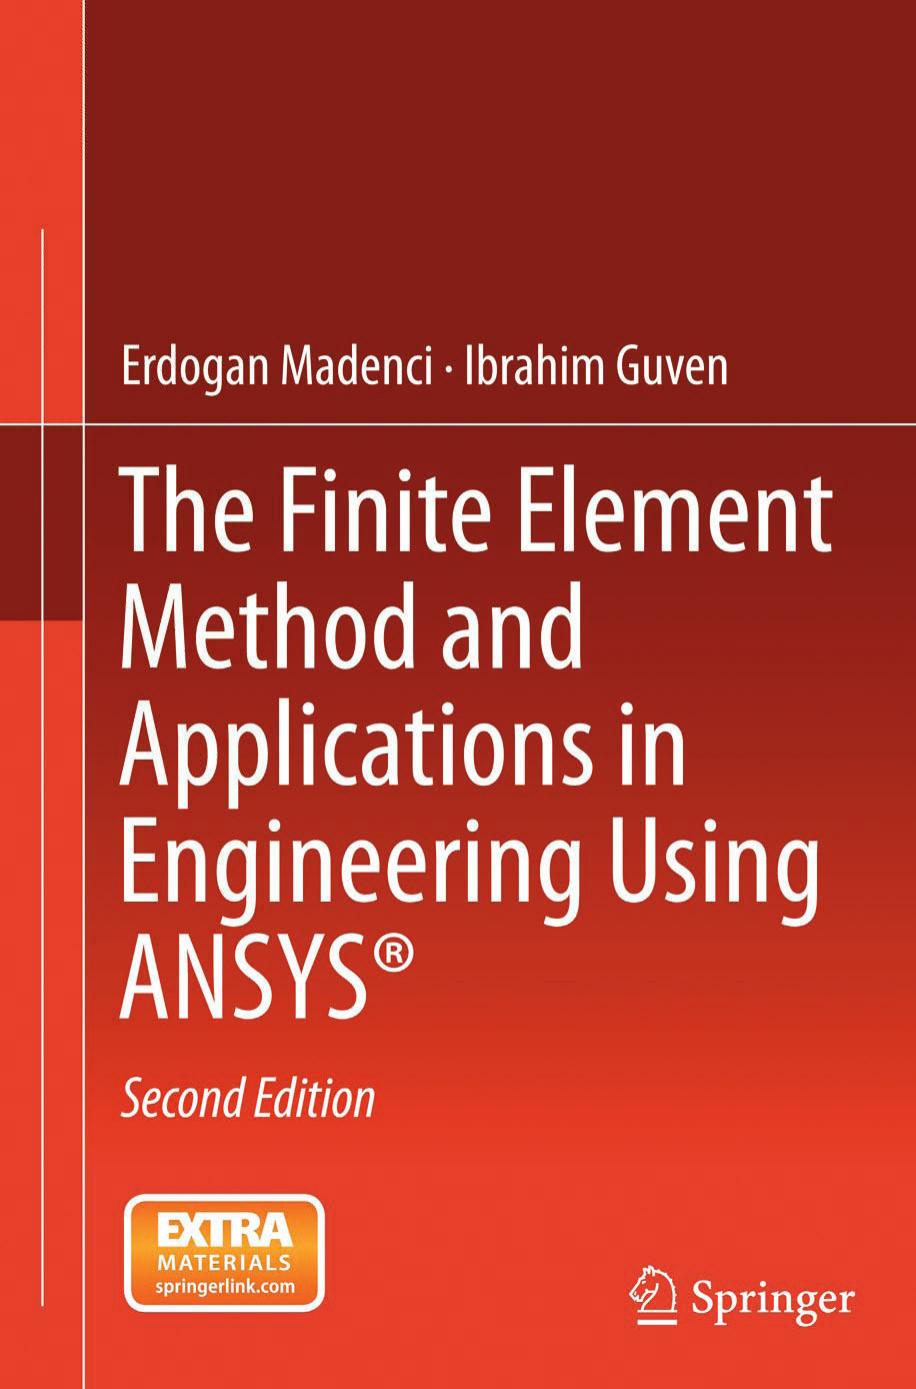 The Finite Element Method and Applications in Engineering Using ANSYS® by Erdogan Madenci & Ibrahim Guven